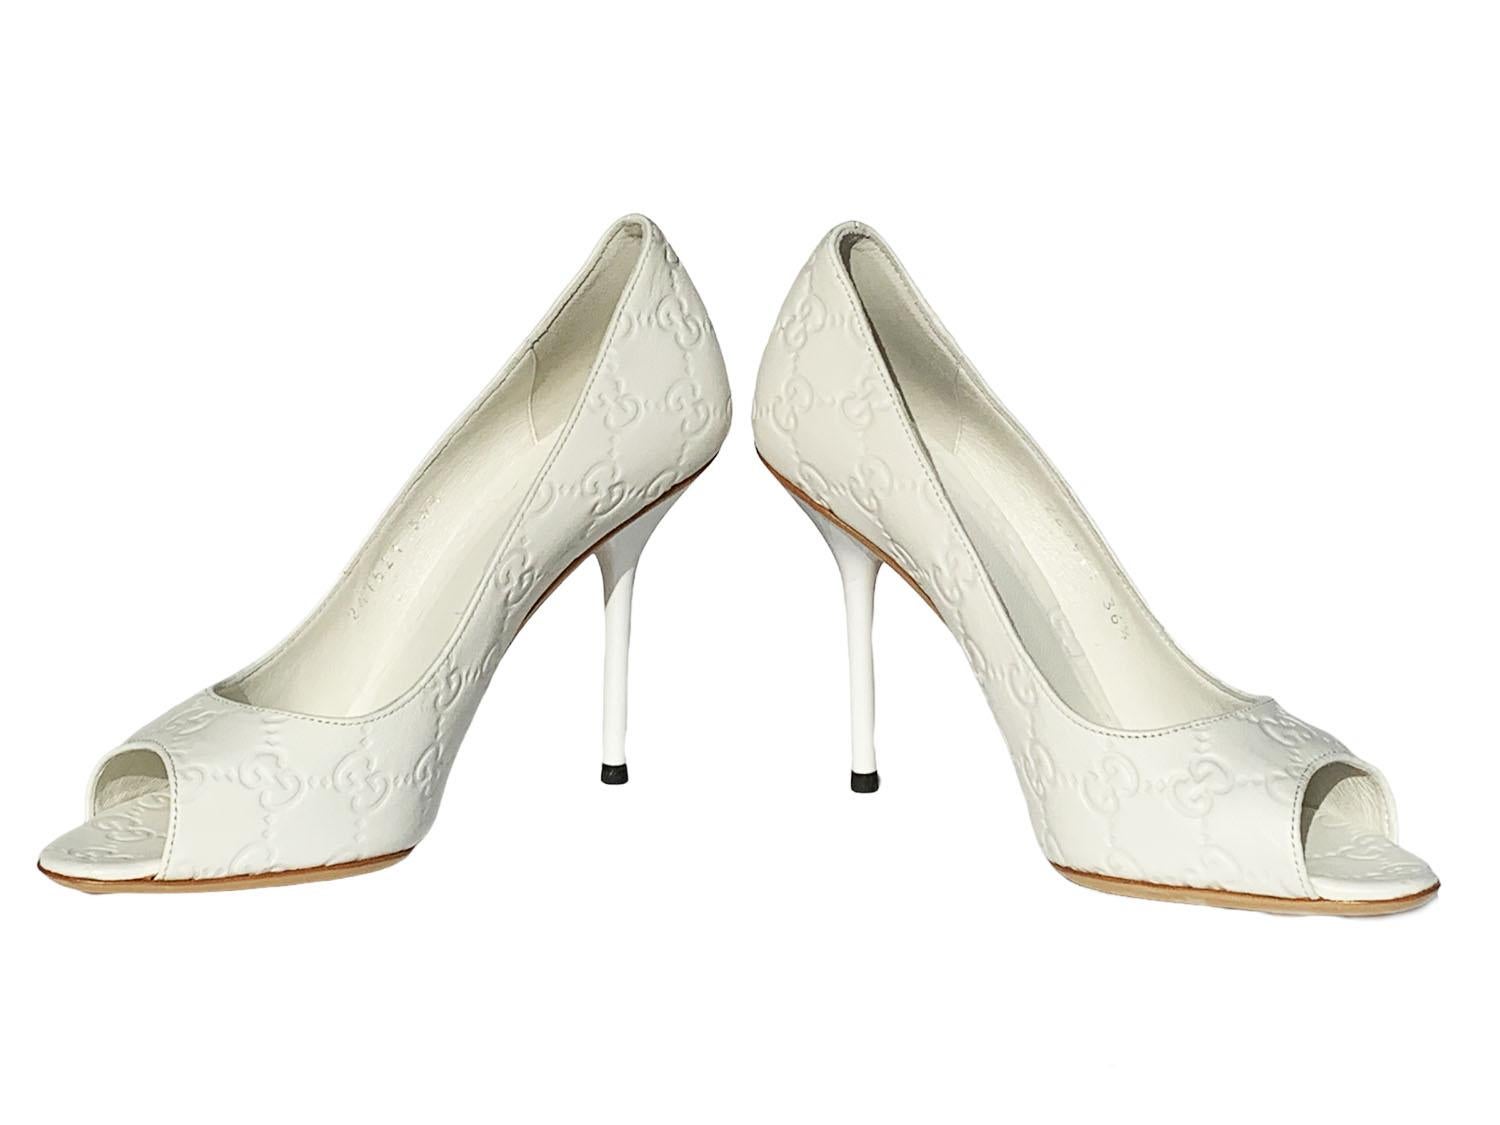 New Gucci GG White Leather Shoes Pumps
Italian size - 36.5
Perfectly crafted from the classy white Guccissima embossed leather,  designed with peep toes, leather insole and sole, heel height - 4 inches.
Made in Italy.
New with box.